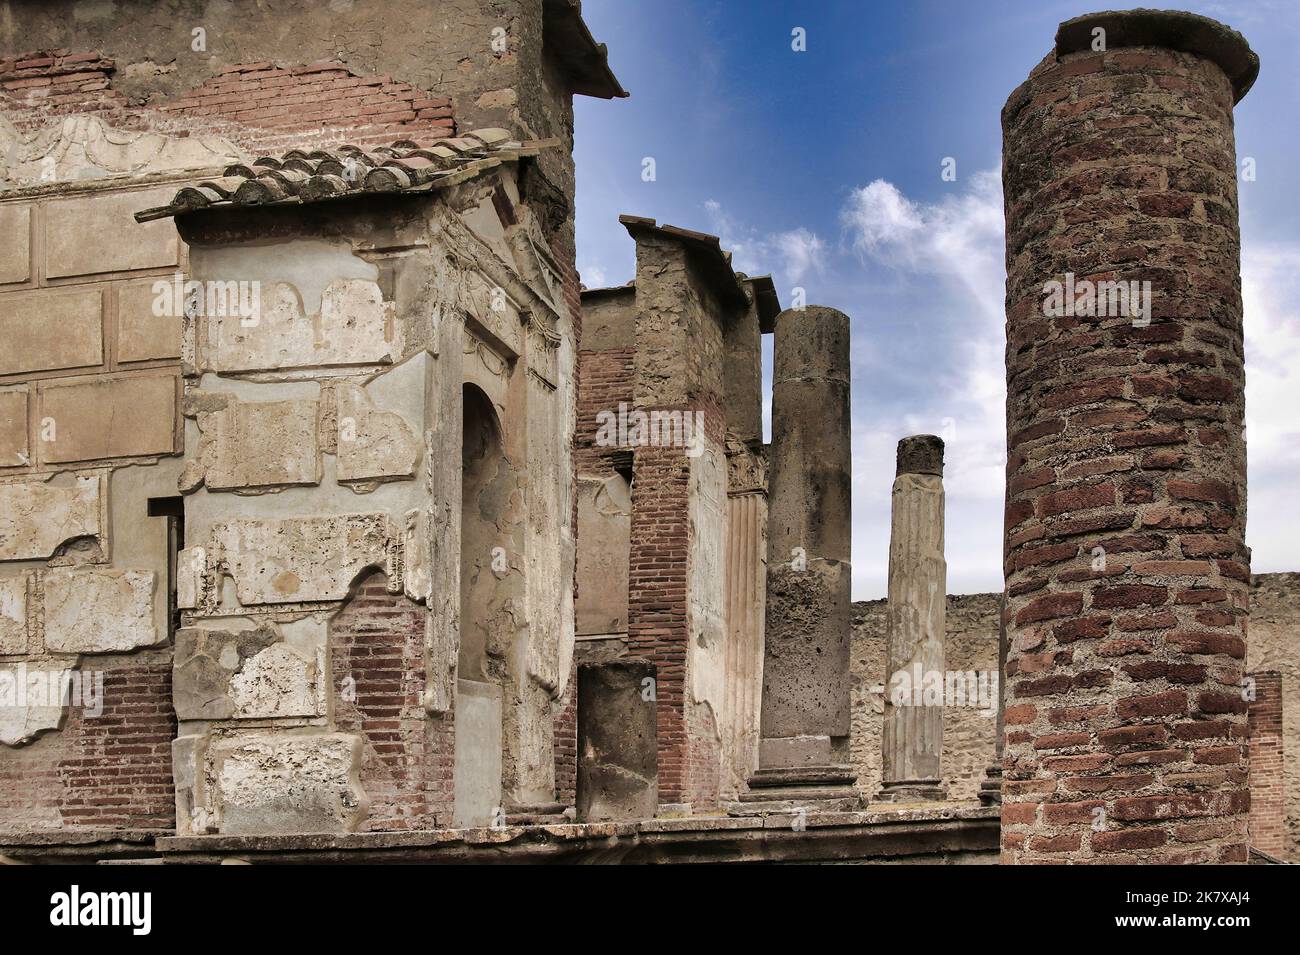 The Temple of Isis in the ancient city of Pompeii Stock Photo